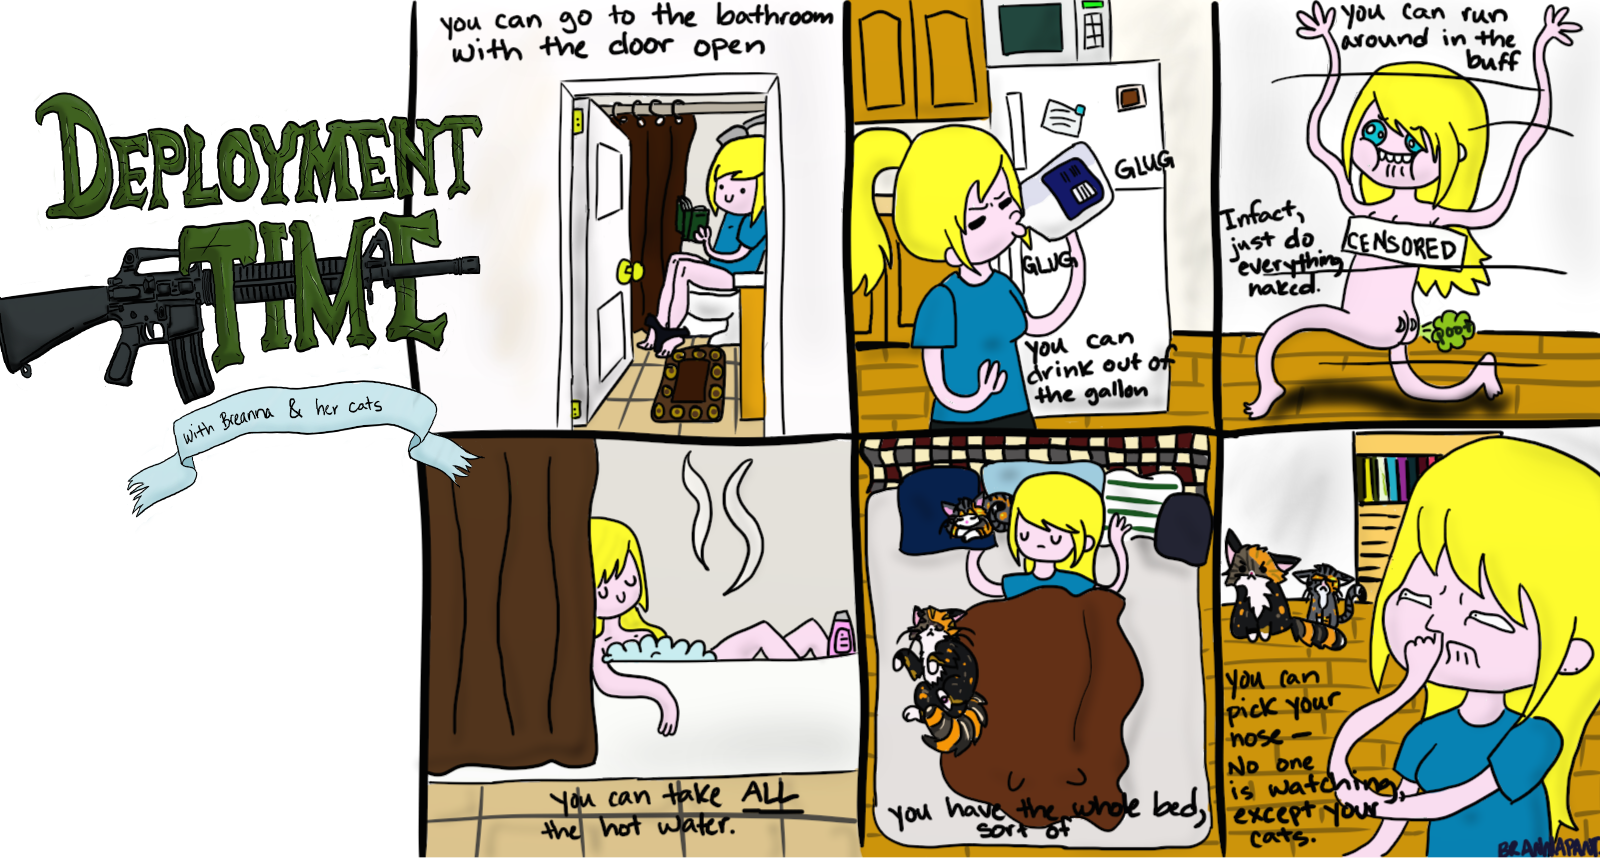 DT: The Positives of Living Alone. the second week of Deployment Time, I upload at least once a week... This comic is about looking at the positives about being